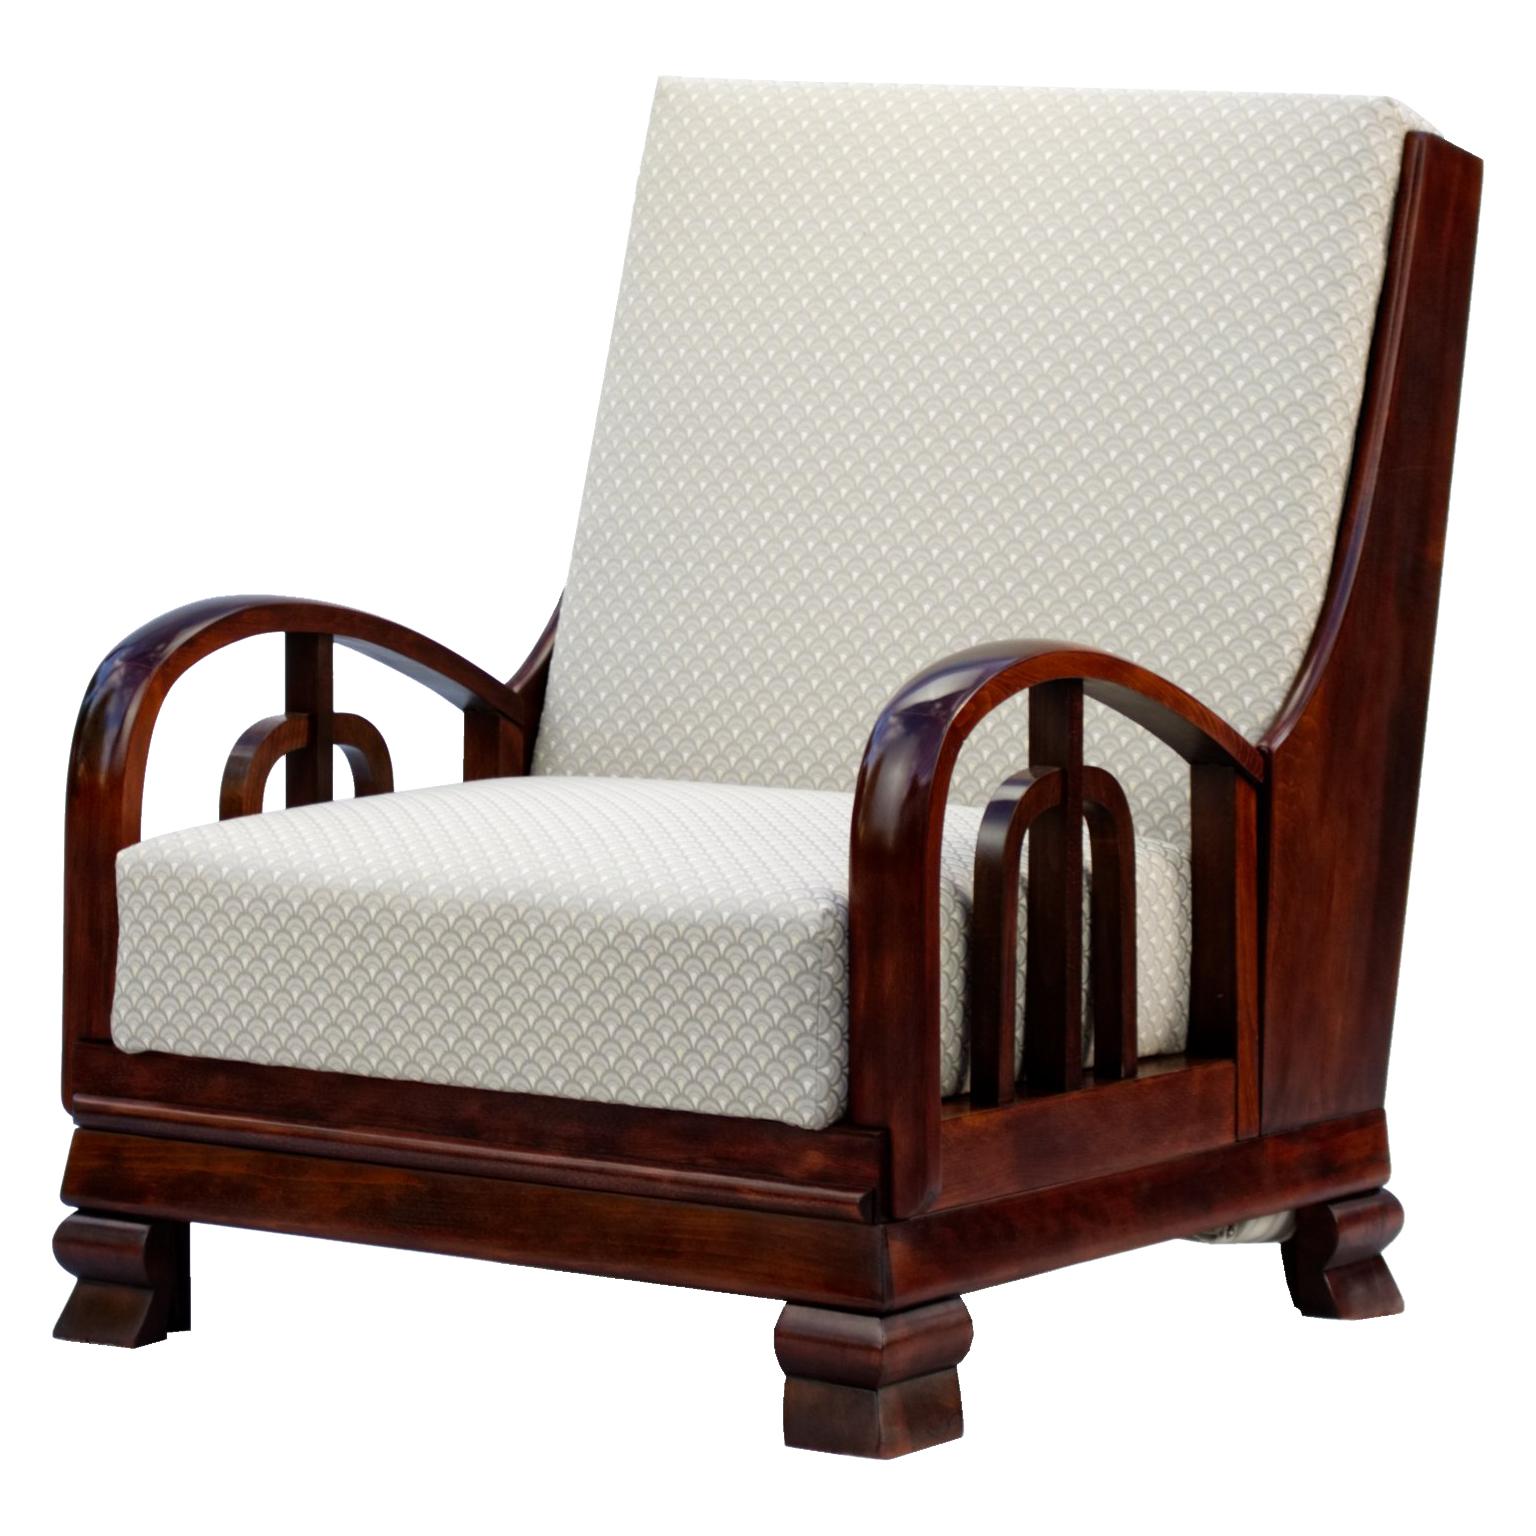 Fully Restored Bed Armchair Attributed to Lajos Kozma, circa 1920